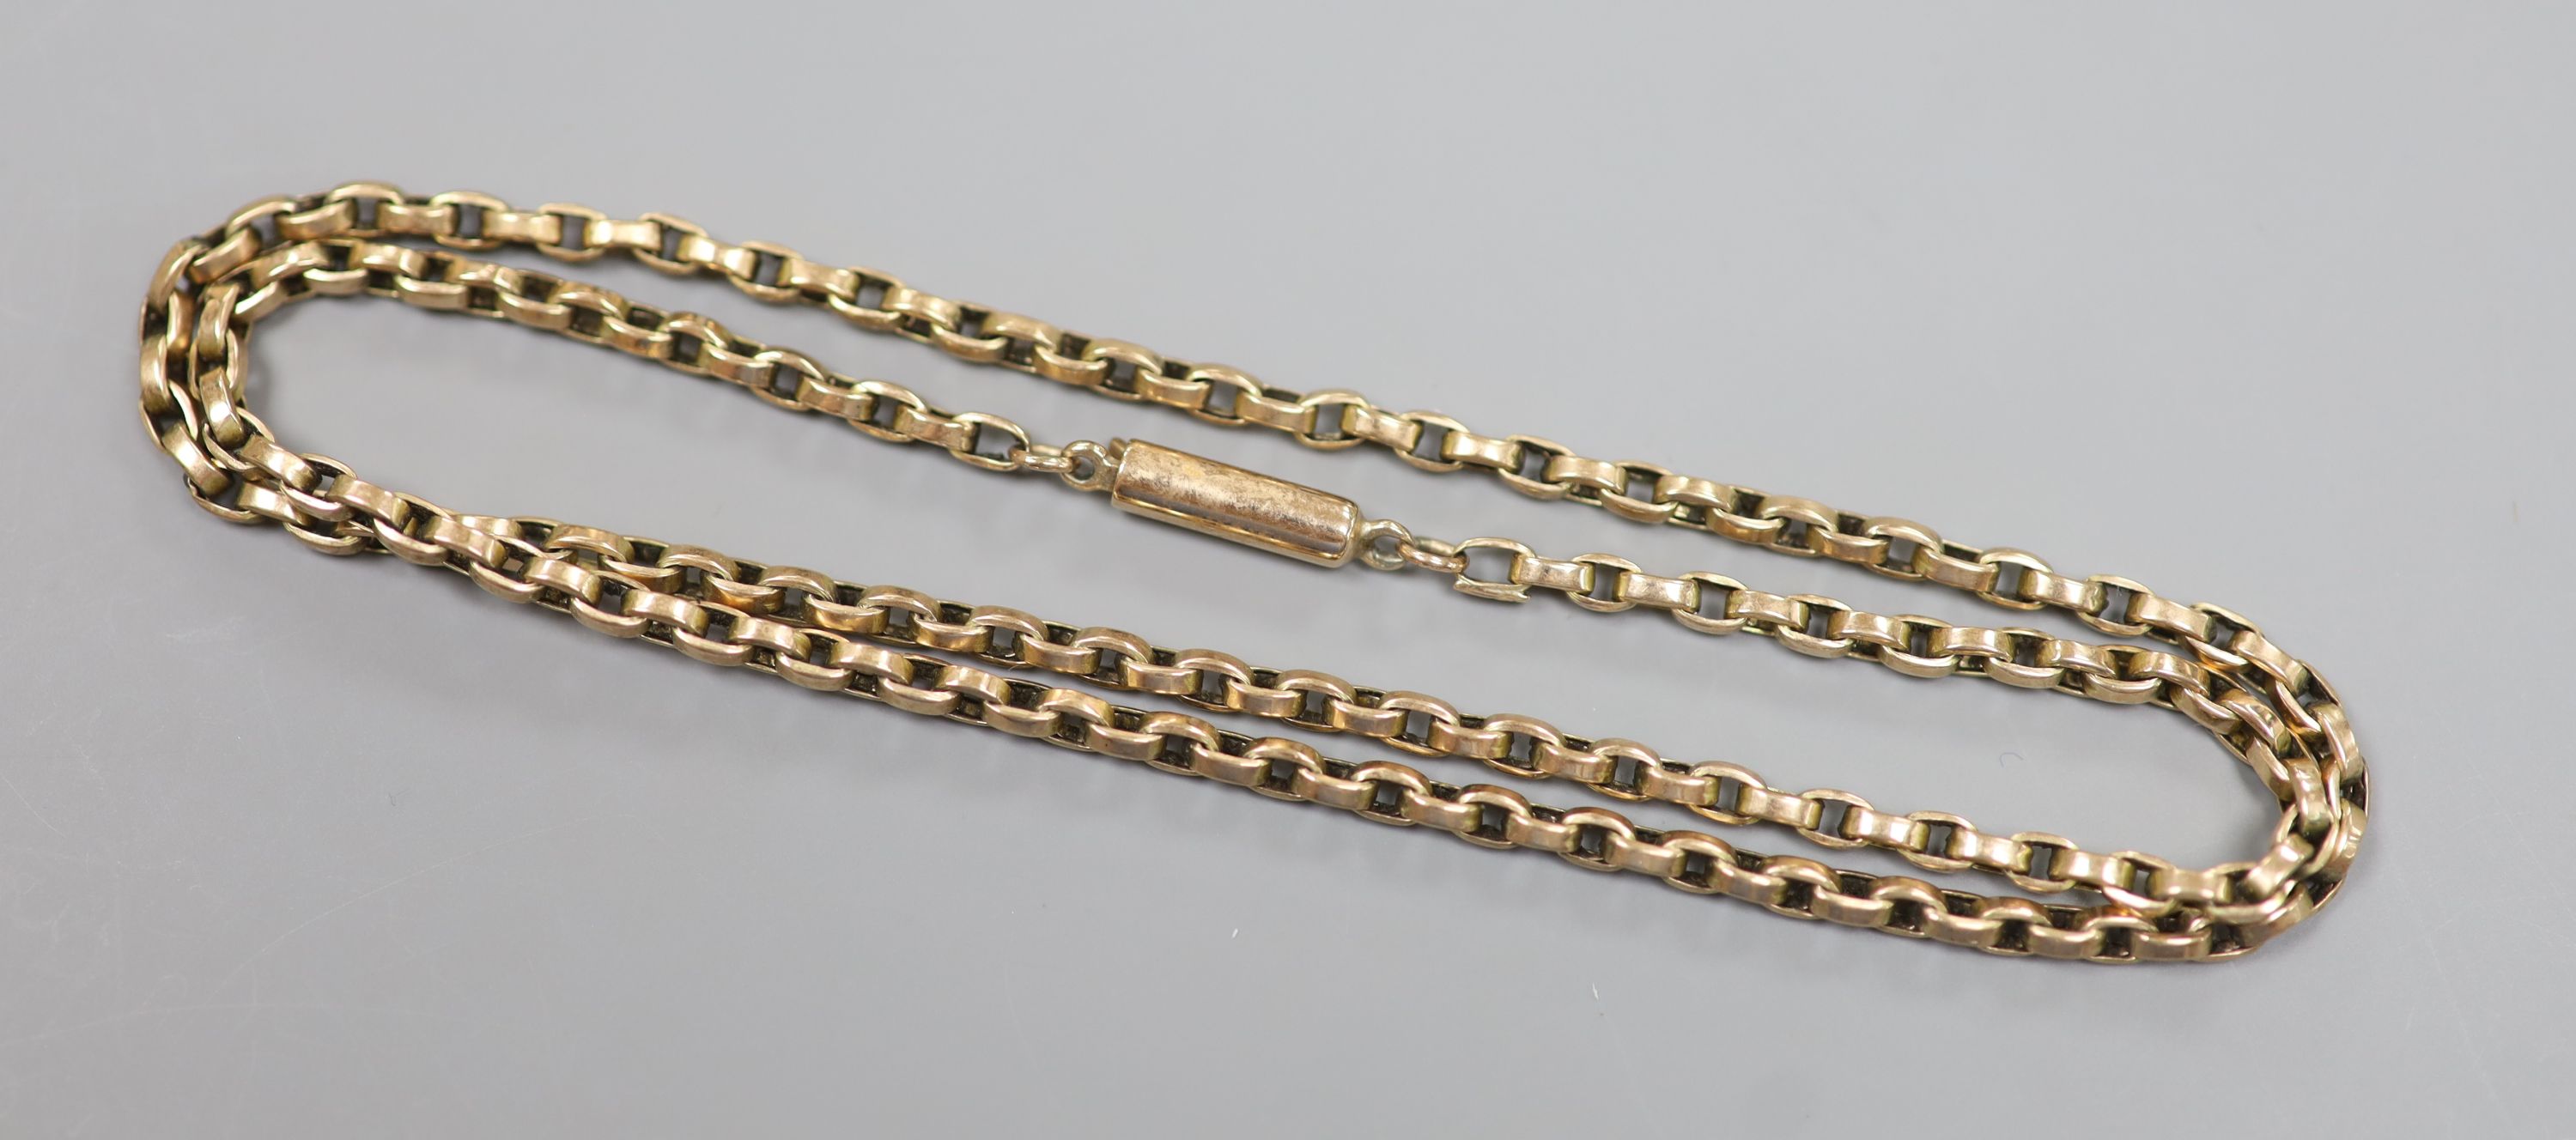 An early 20th century 9ct chain, 48cm